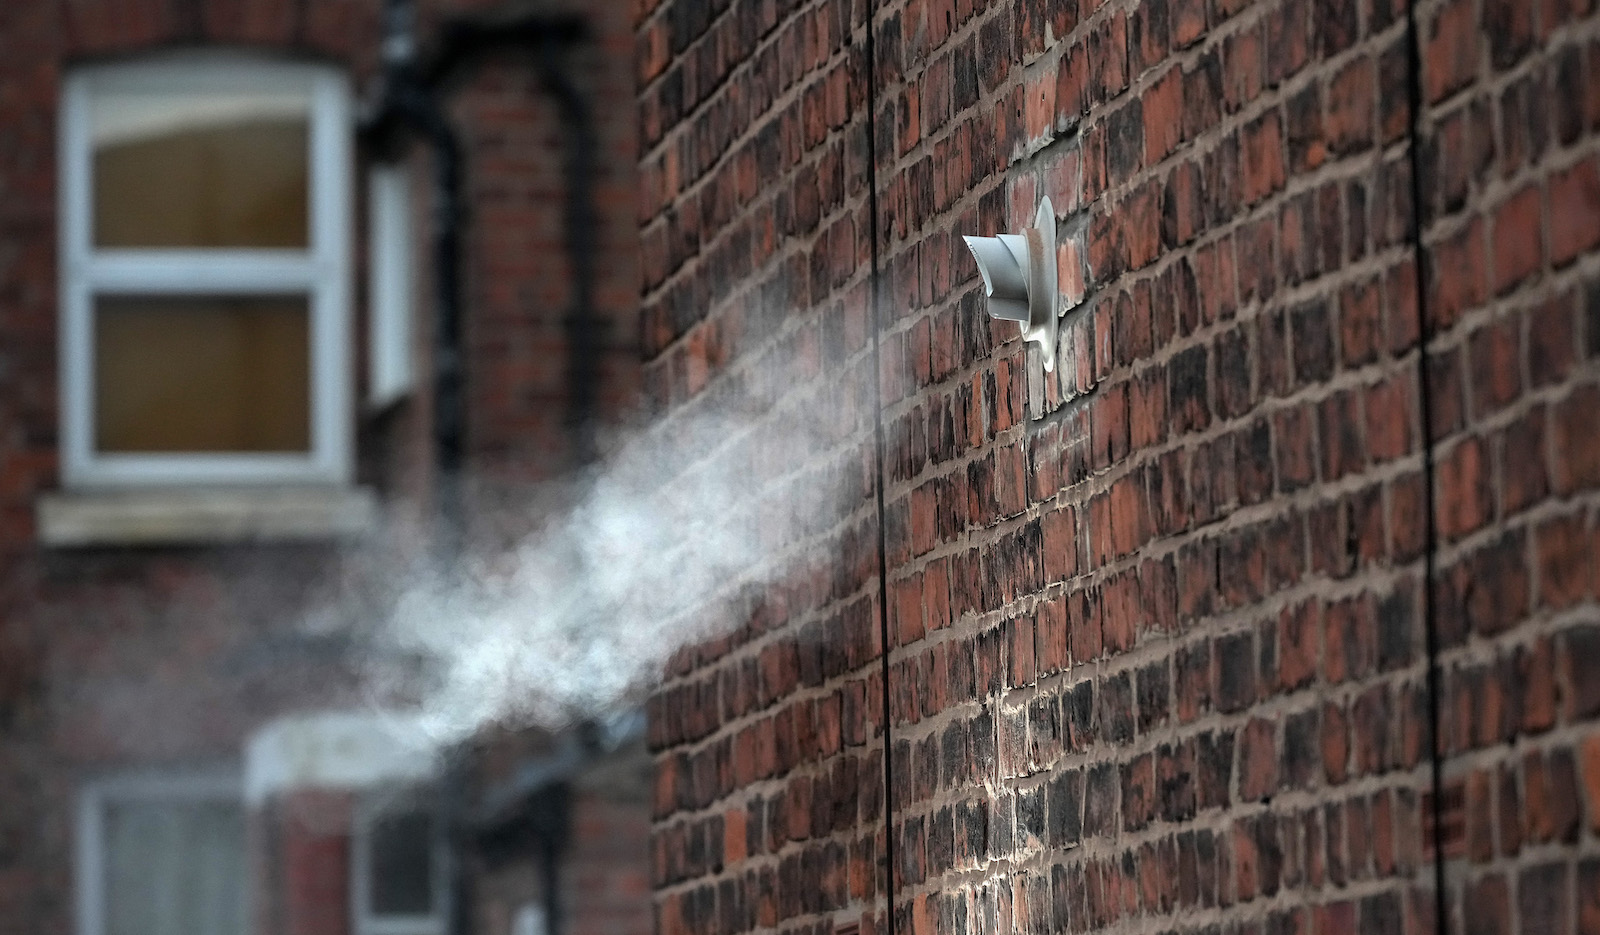 white steam pours out of a flue on the side of a building from a natural gas boiler